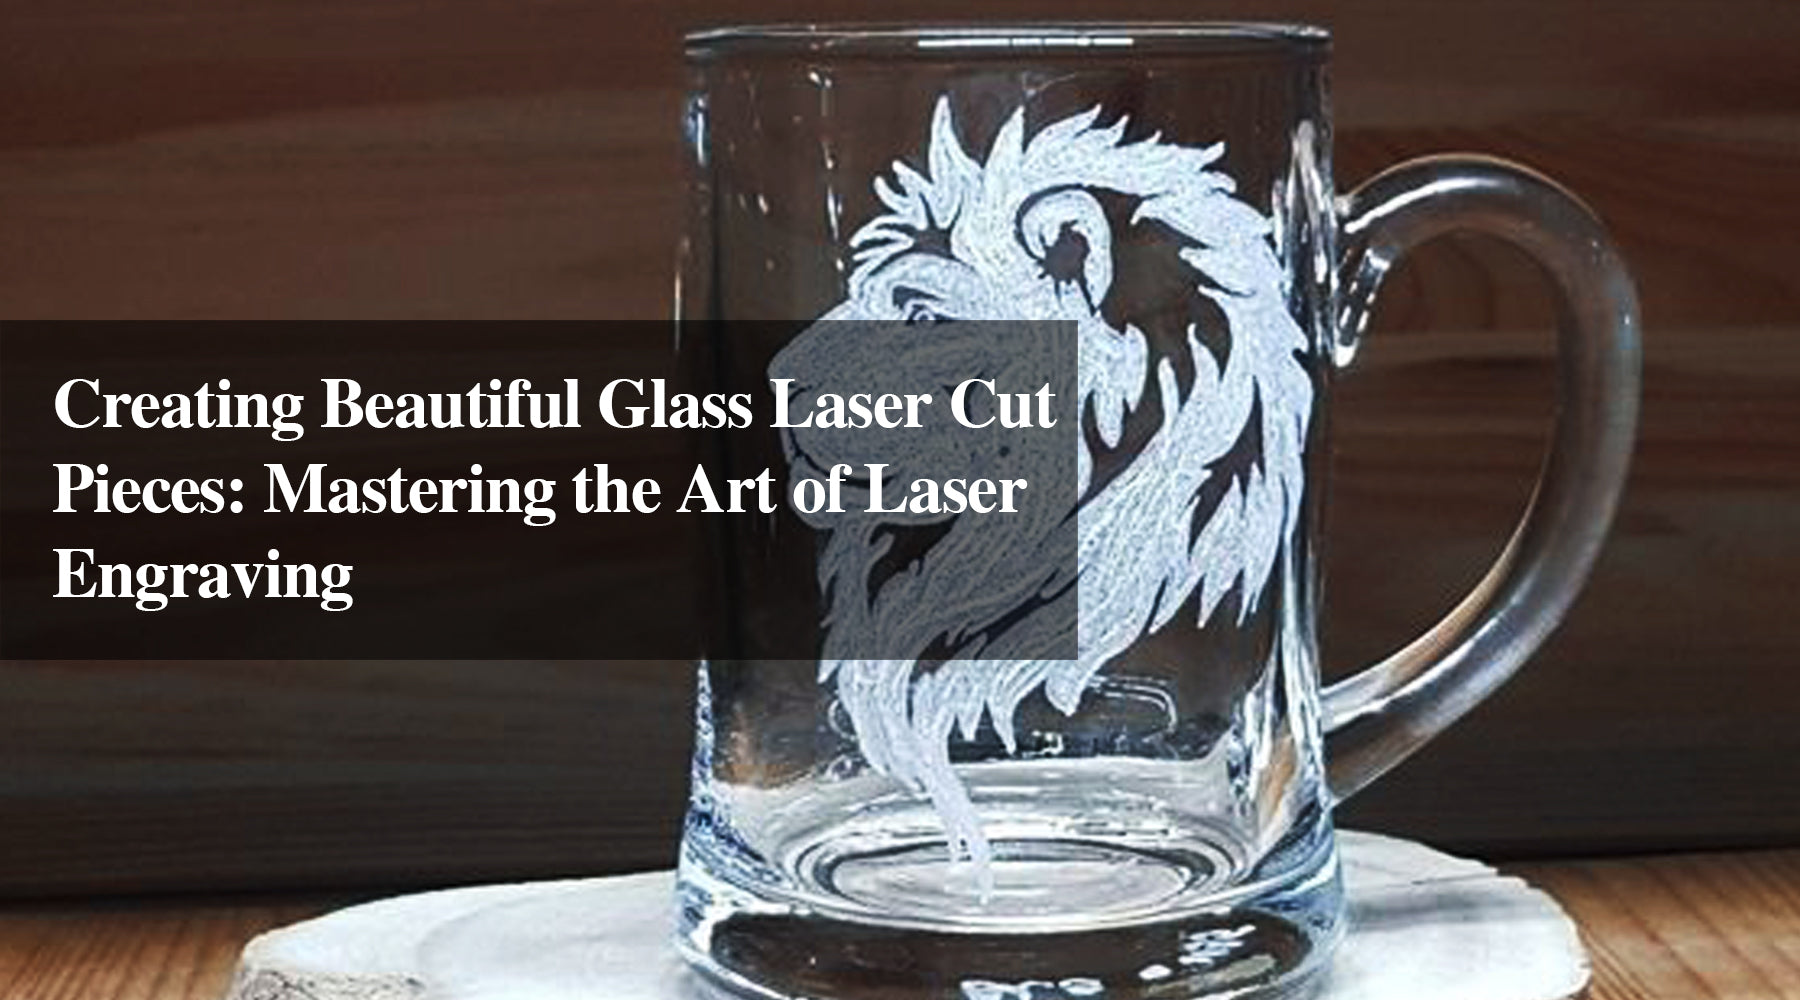 Creating Beautiful Laser Cut Pieces: Mastering the Art of Laser Engraving on Glass